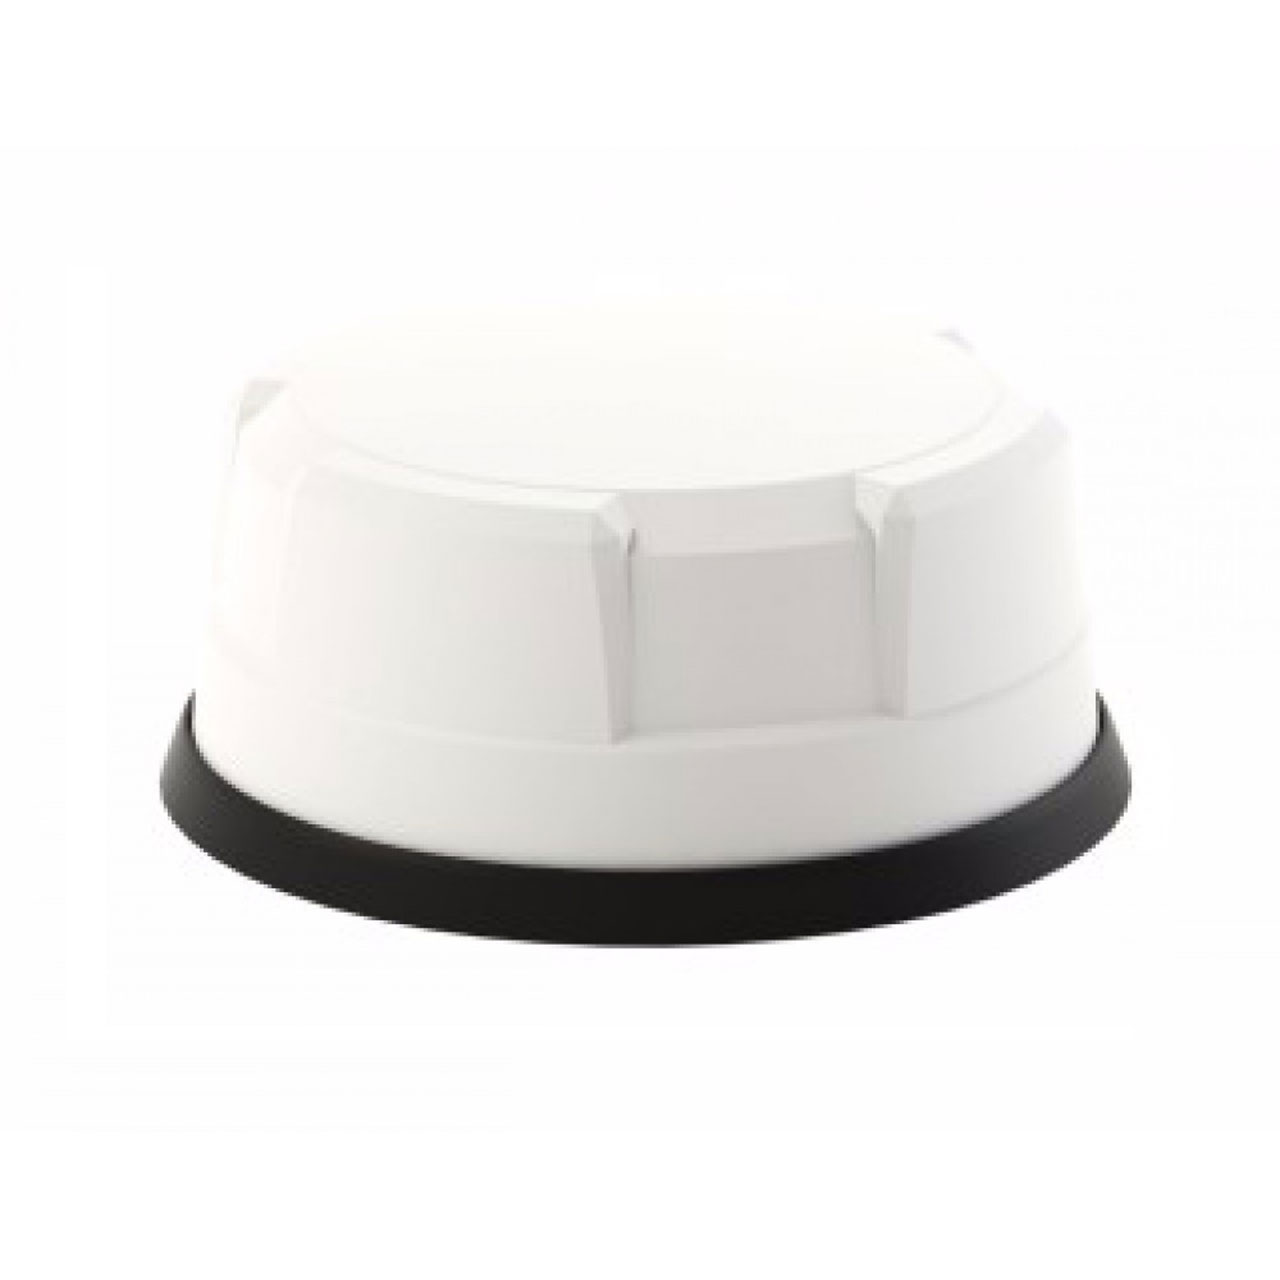 6001364 - 6in1 Dome Antenna - 2x5G/4G, GNSS, 3xWi-Fi, 2.4/5GHz, Bolt Mount, 5m, Black